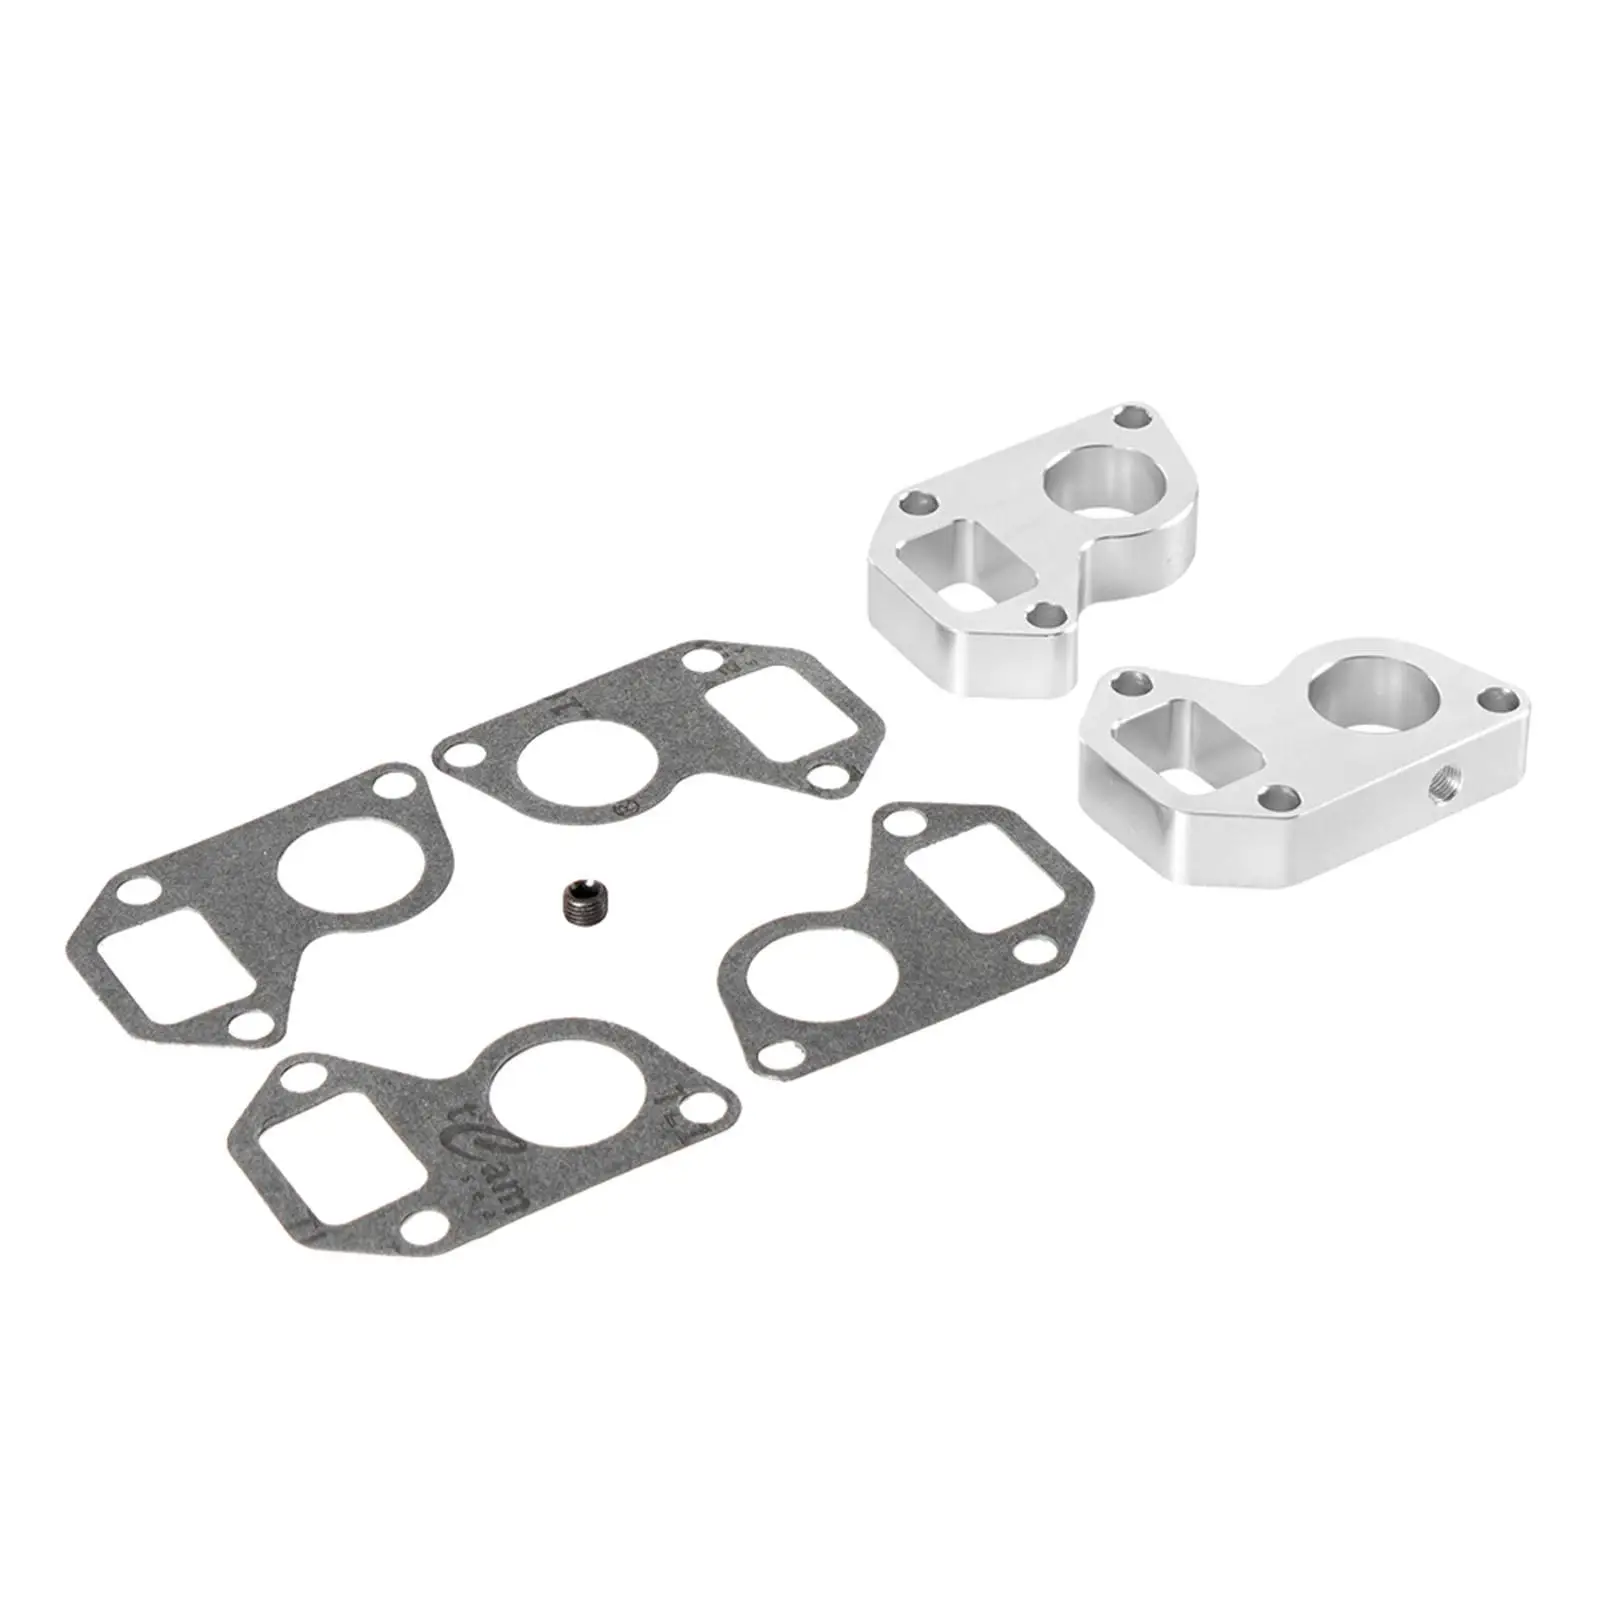 1 Set Water Pump Spacer Truck Adapter Swap Kit, for LS Replace Easy to Install